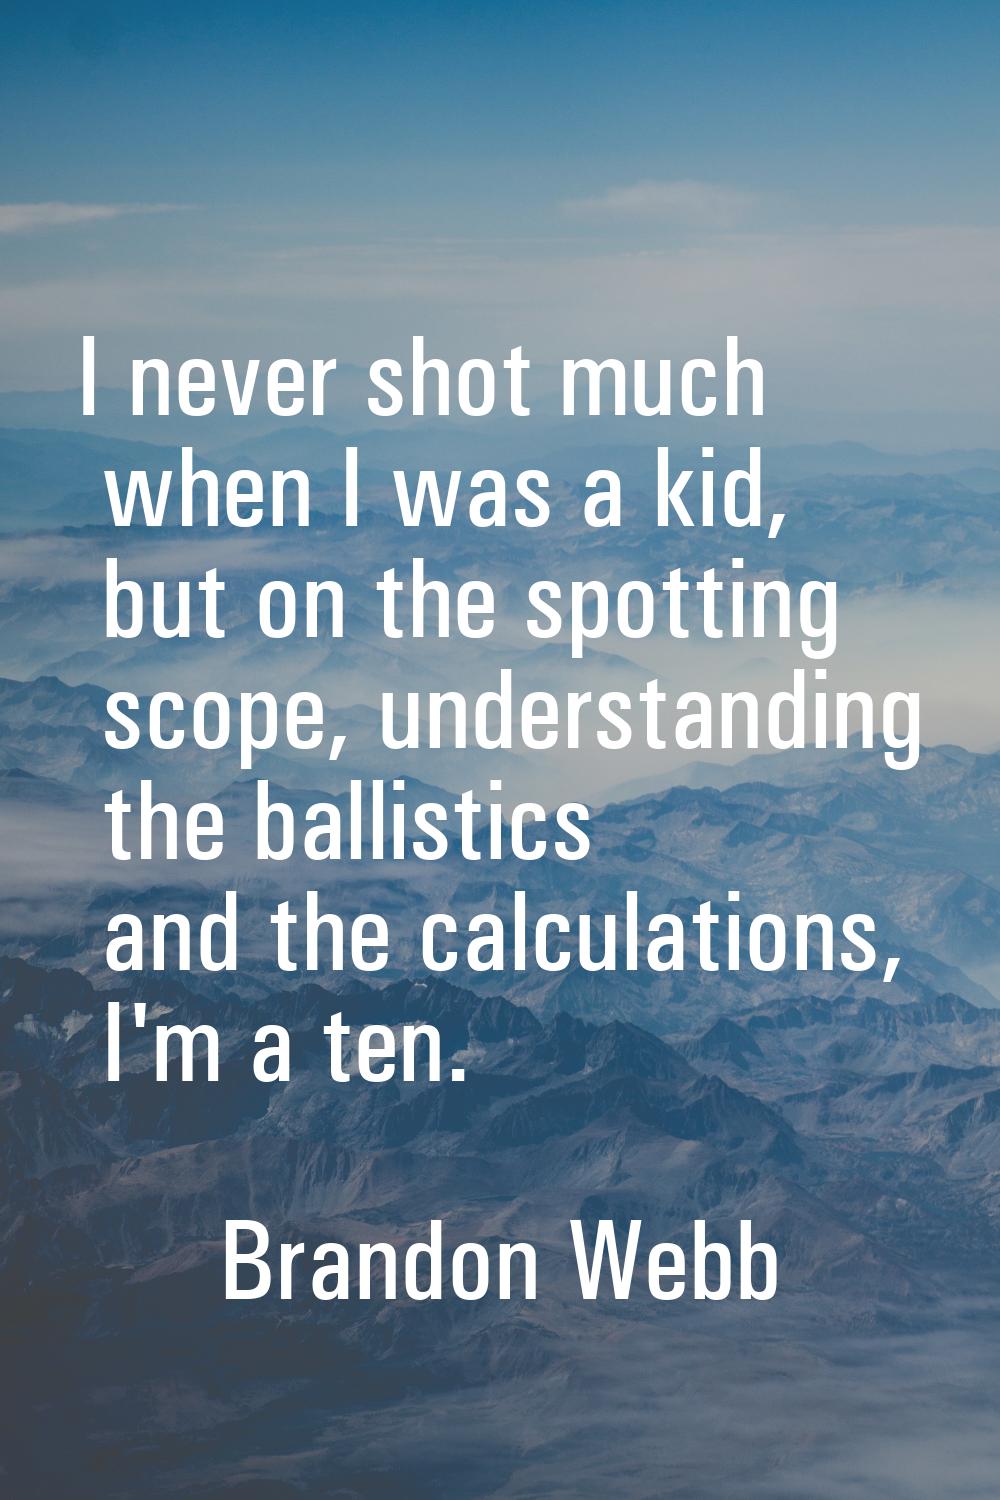 I never shot much when I was a kid, but on the spotting scope, understanding the ballistics and the